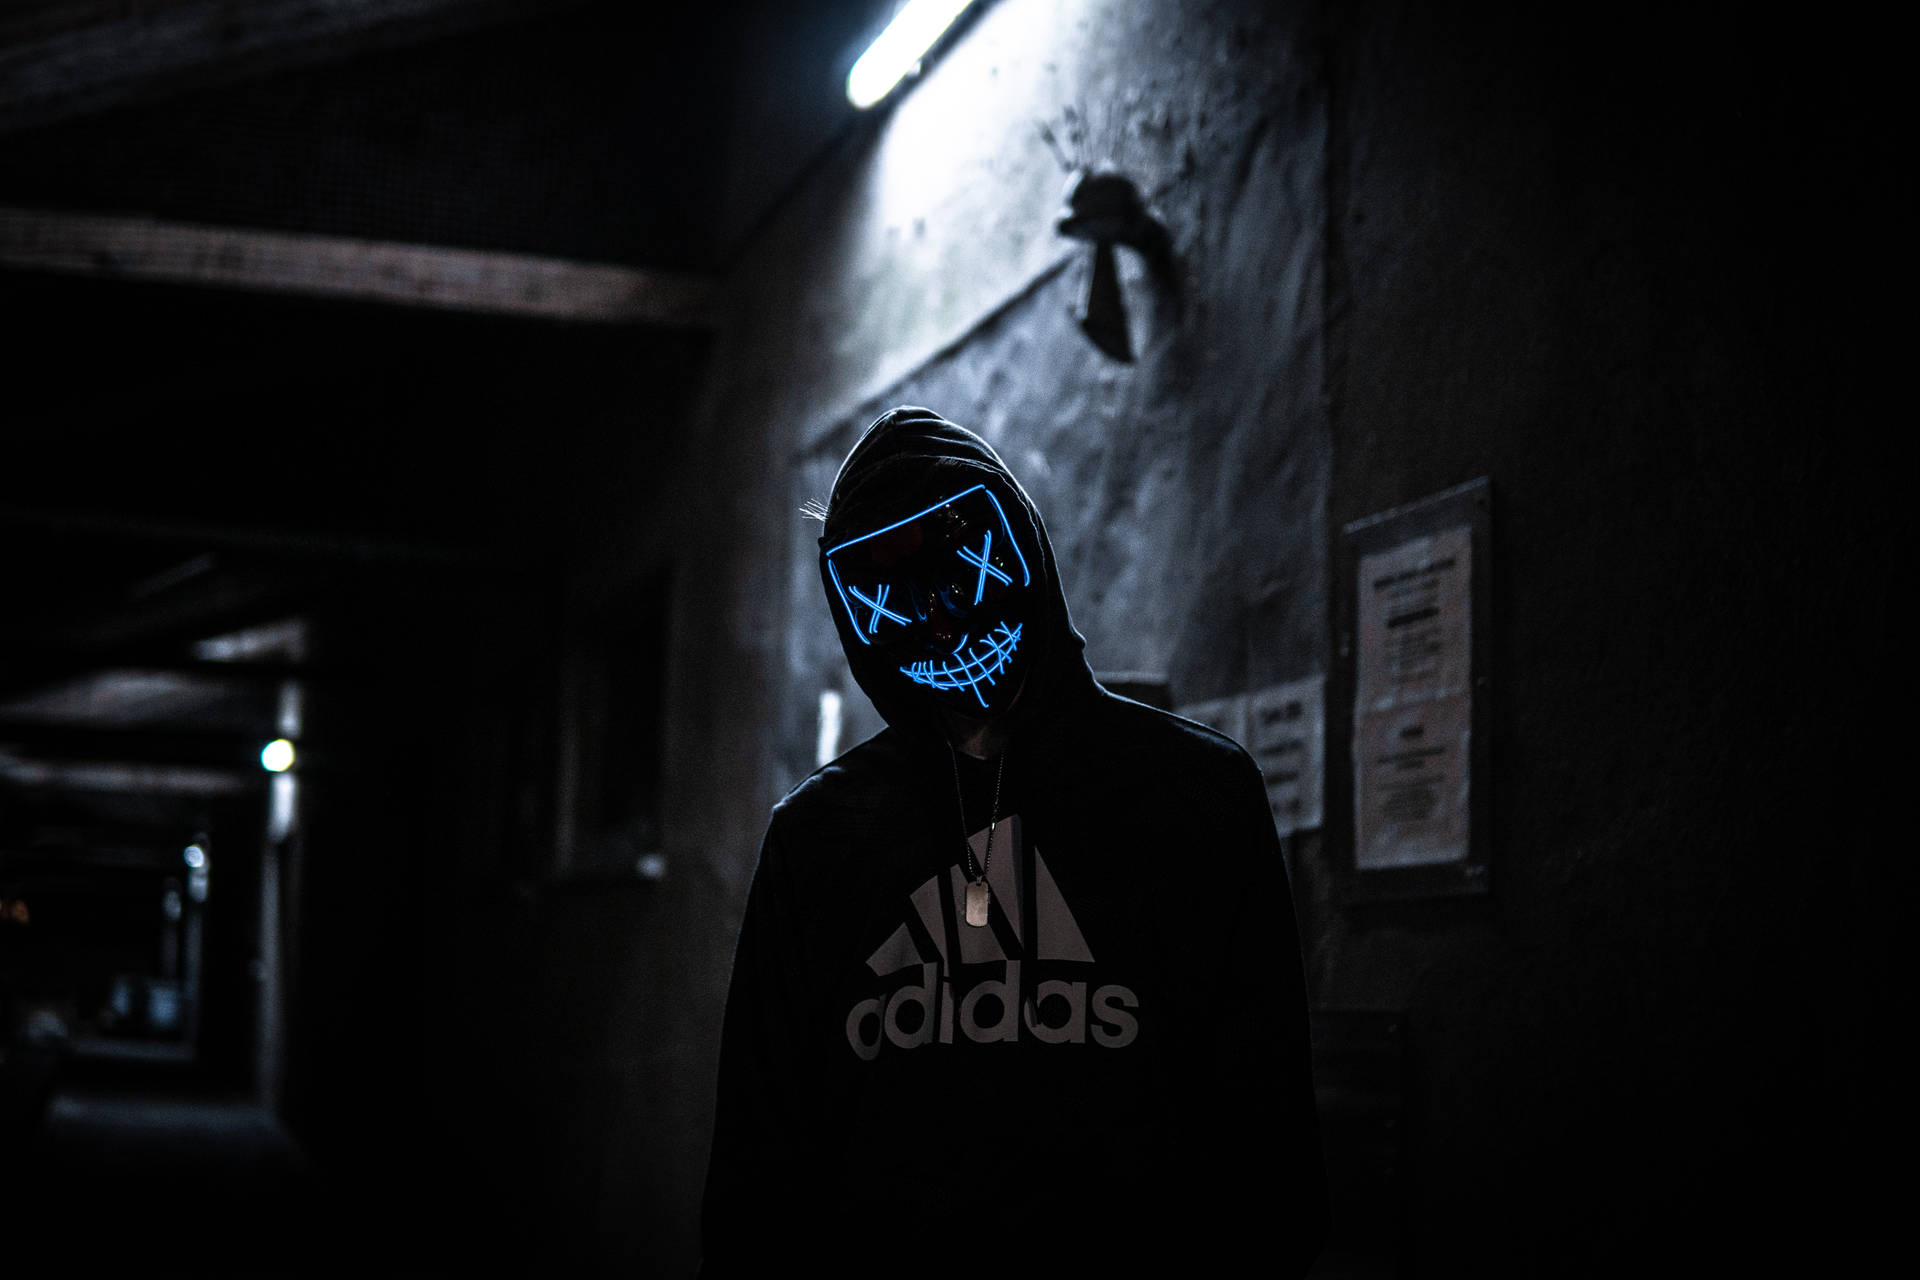 Admirer Of The Purge In Adidas Hoodie Background